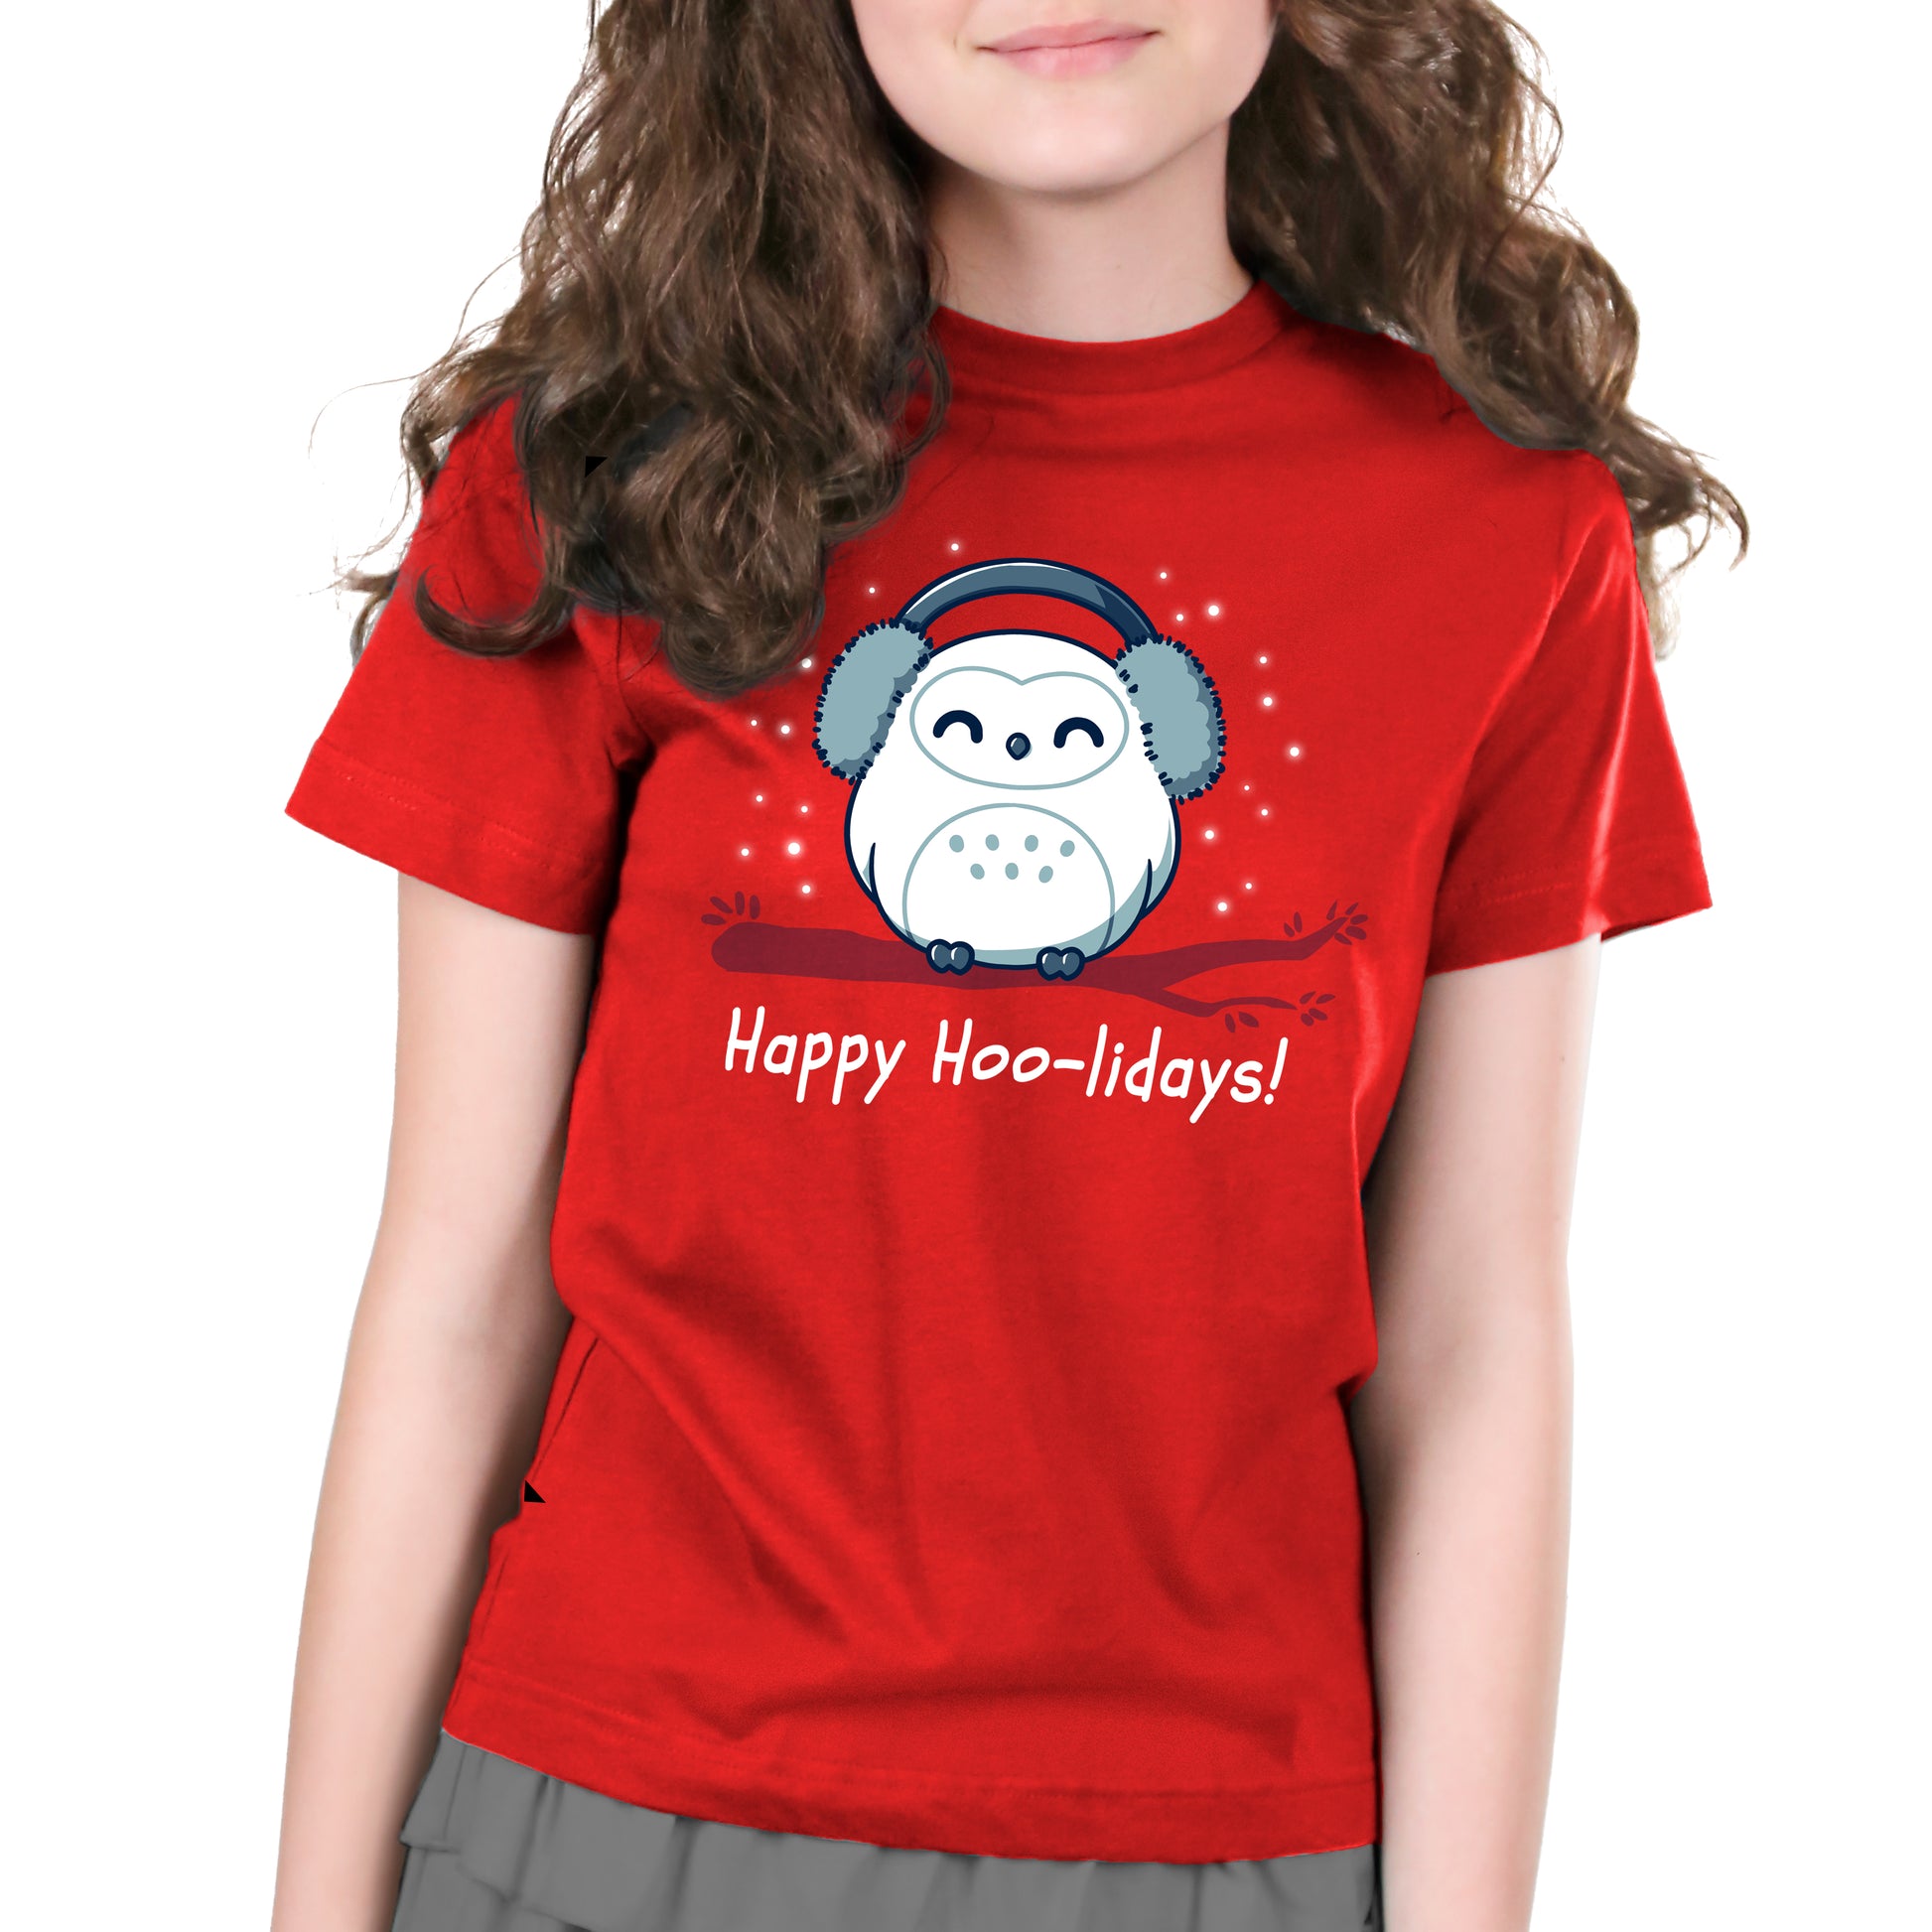 A girl wearing a red t-shirt that says "Happy Hoo-lidays" by TeeTurtle, radiating comfort.